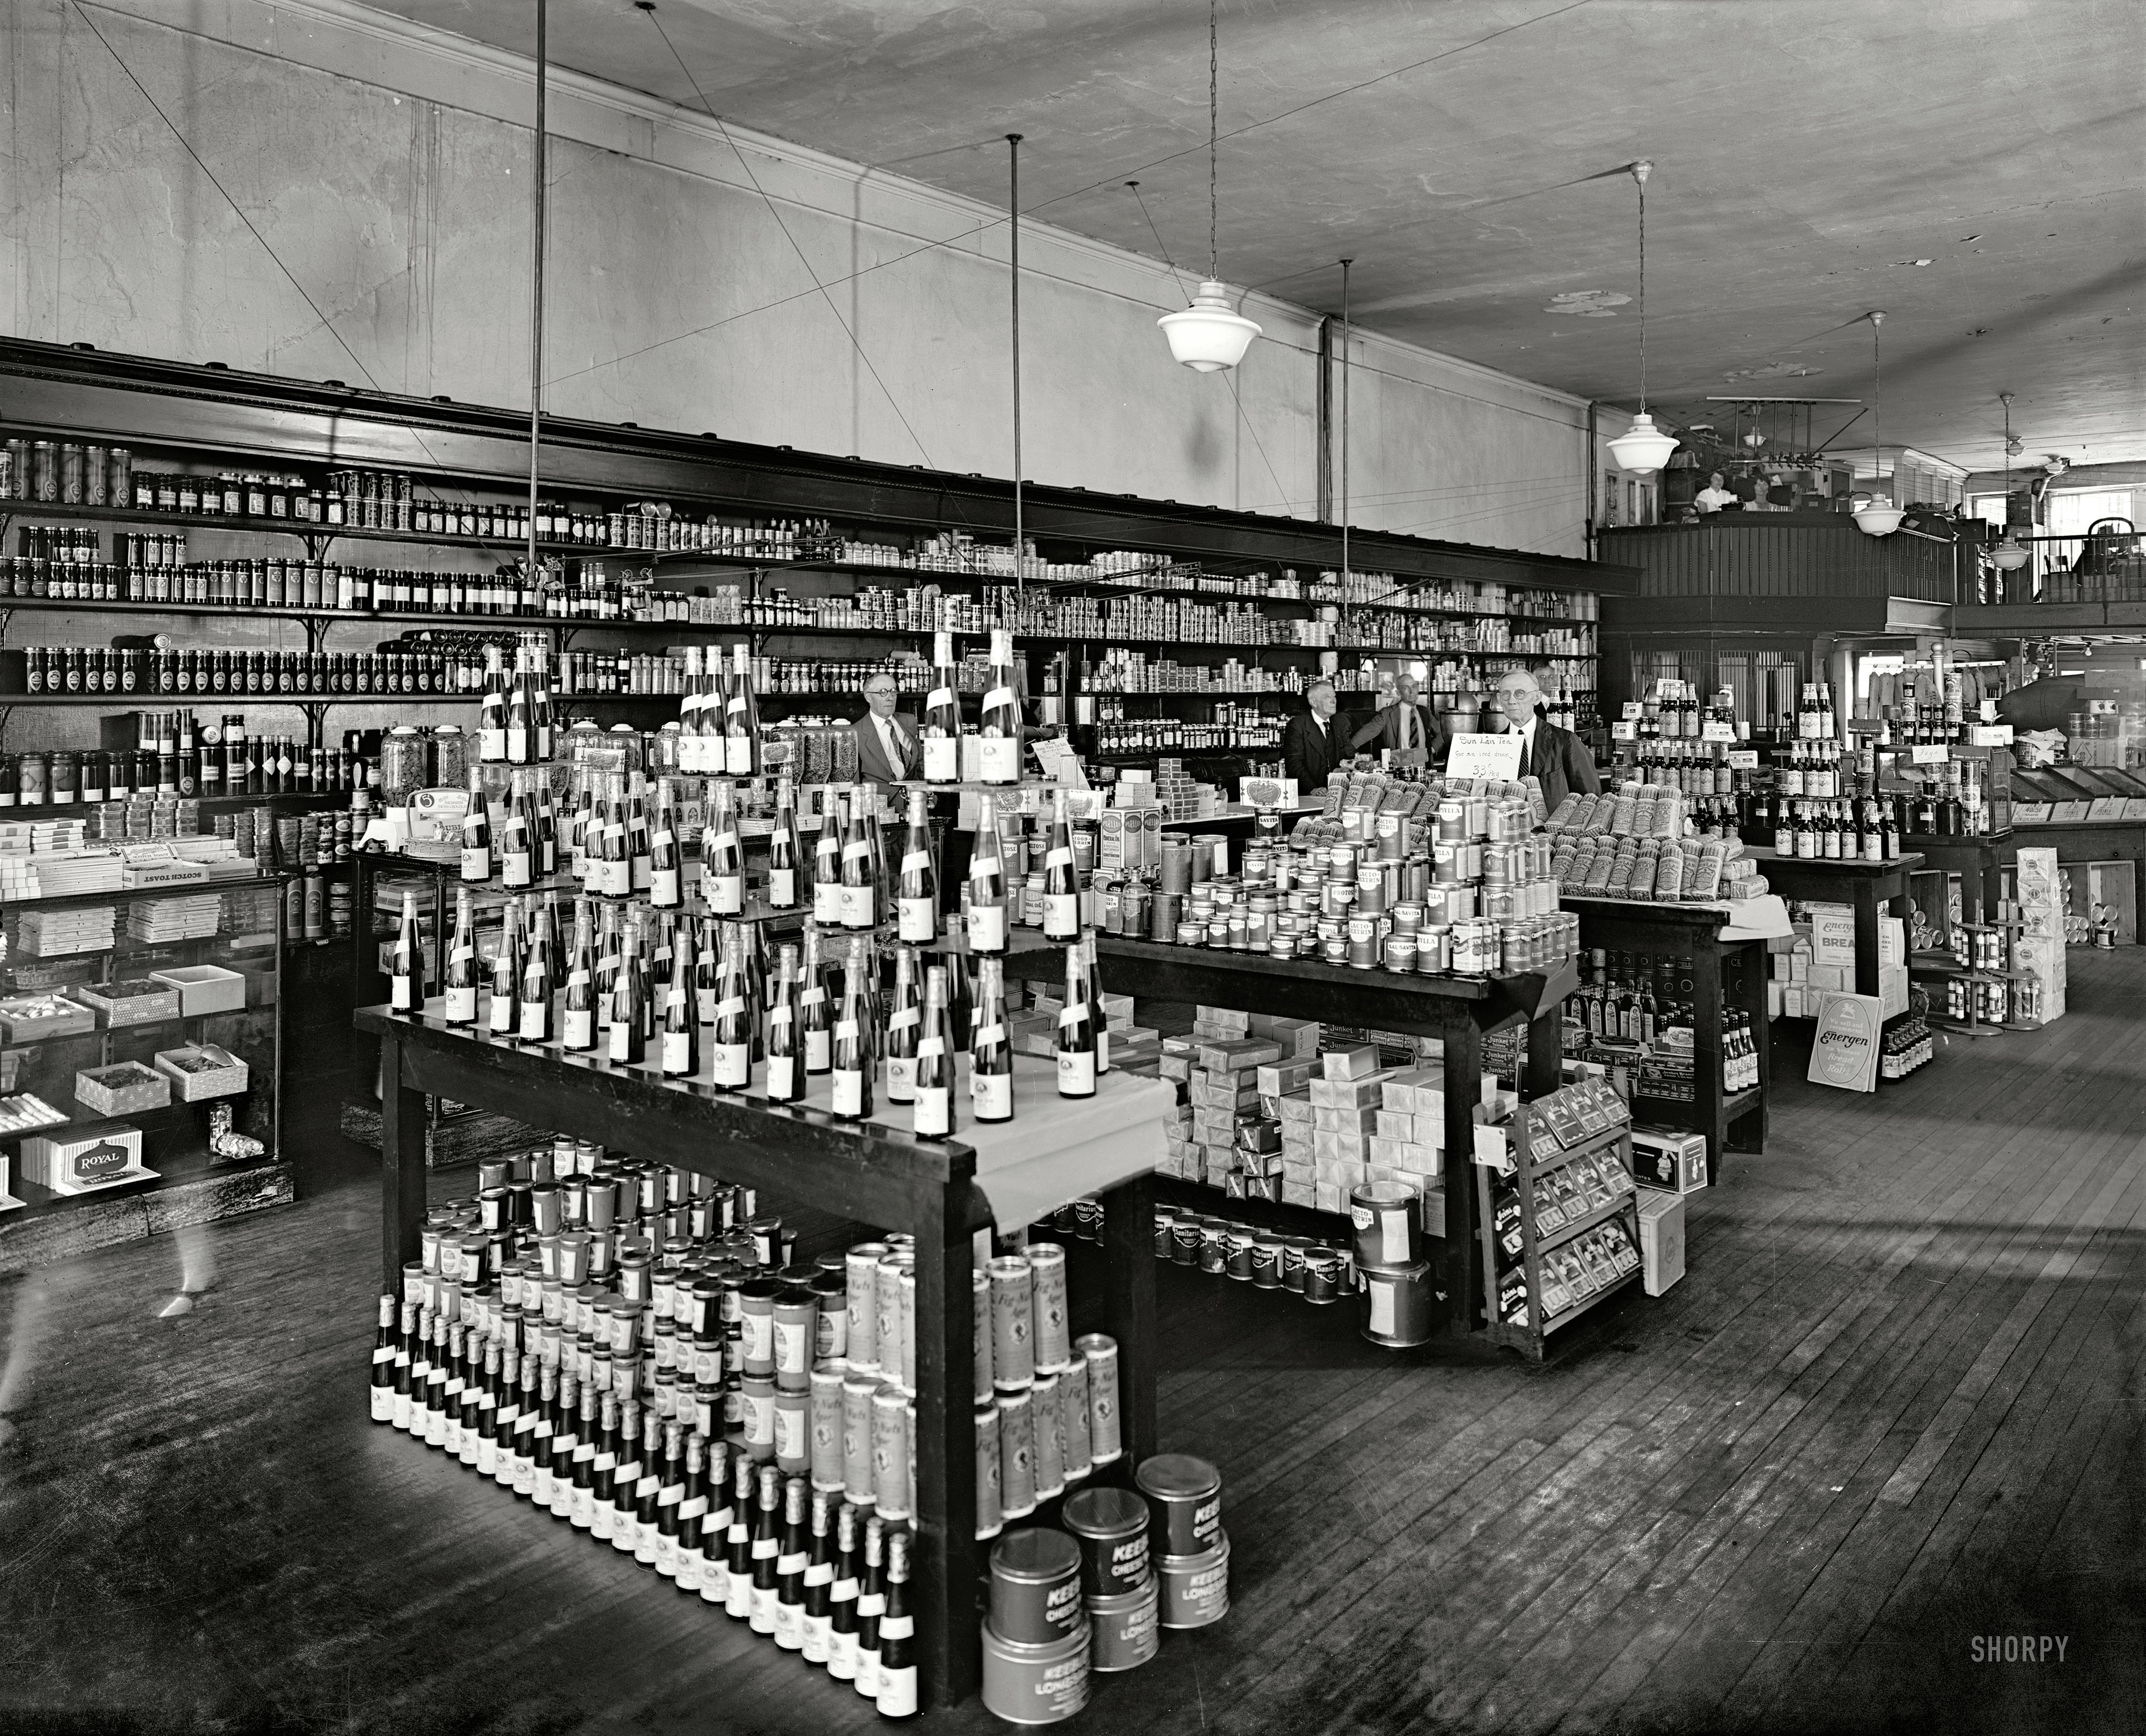 Washington, D.C., circa 1920. "John D. Hayes" is the caption here, perhaps indicating a connection to the Fanny Farmer chain of candy stores. Economics majors have probably heard of Adam Smith's "invisible hand" of the market; here we see evidence of its phantom foot. National Photo Co. View full size.